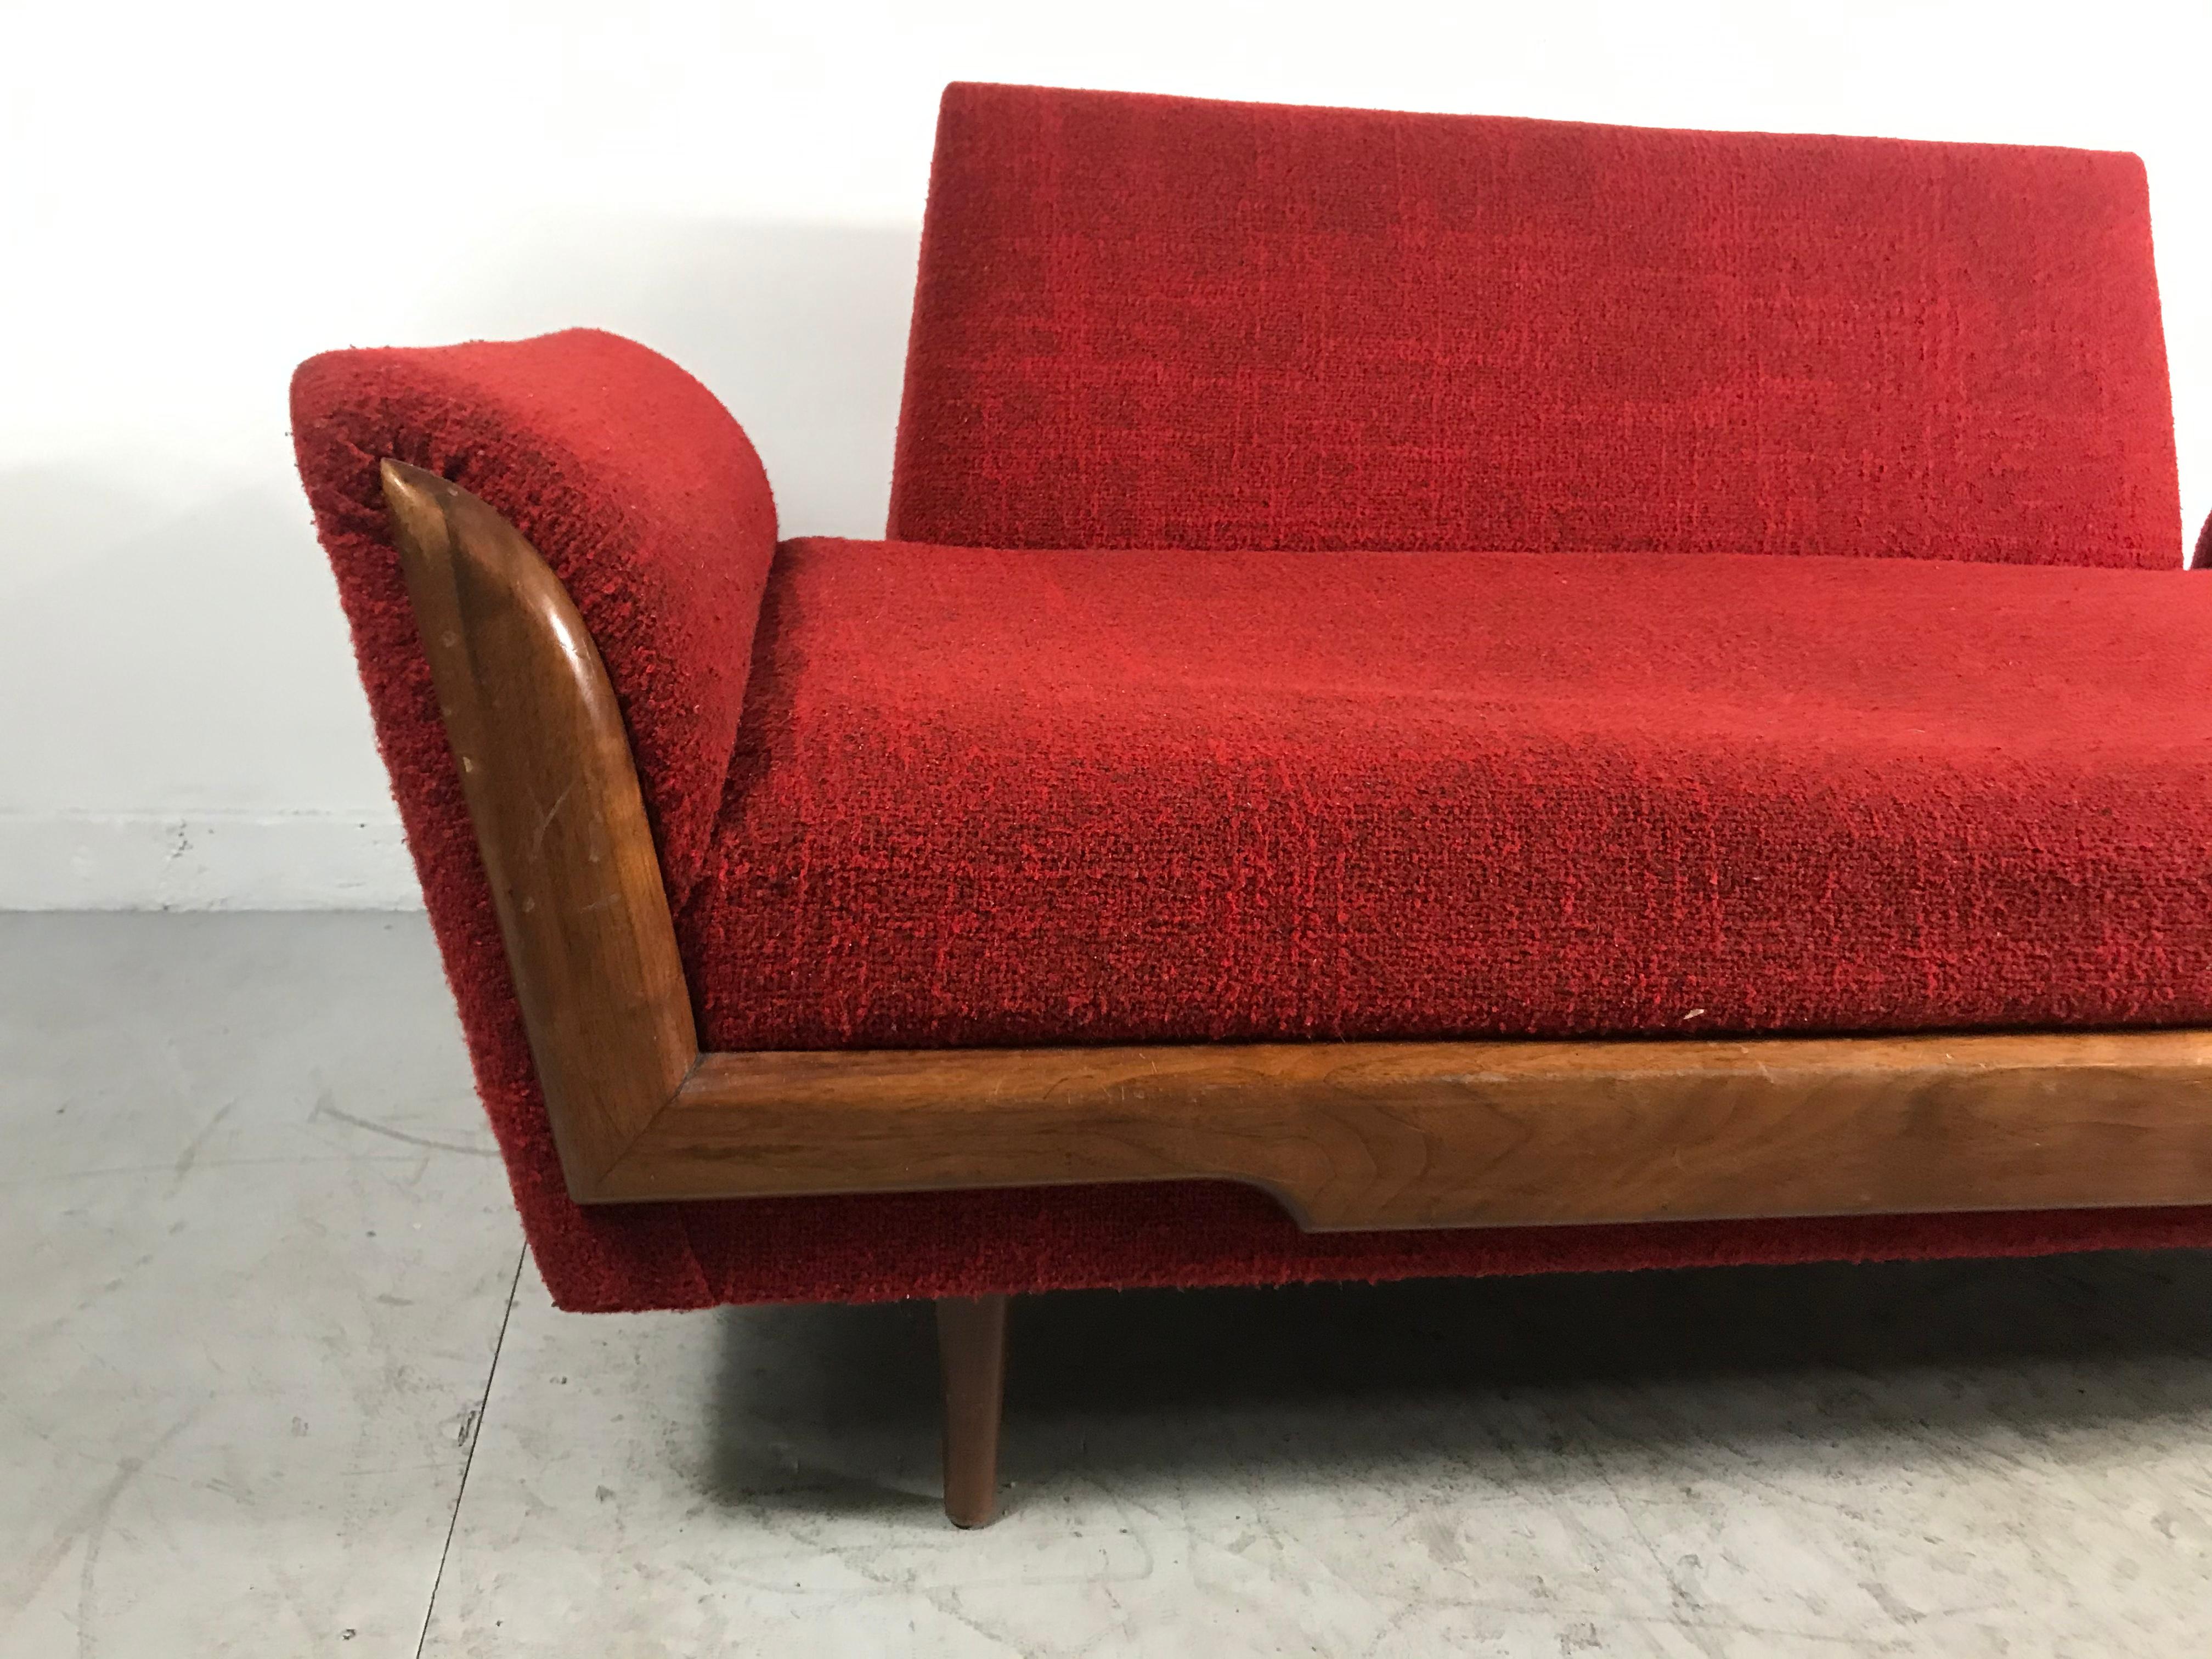 American Classic Modernist 2-Seat Sofa, Sculpted Walnut Attributed to Adrian Pearsall